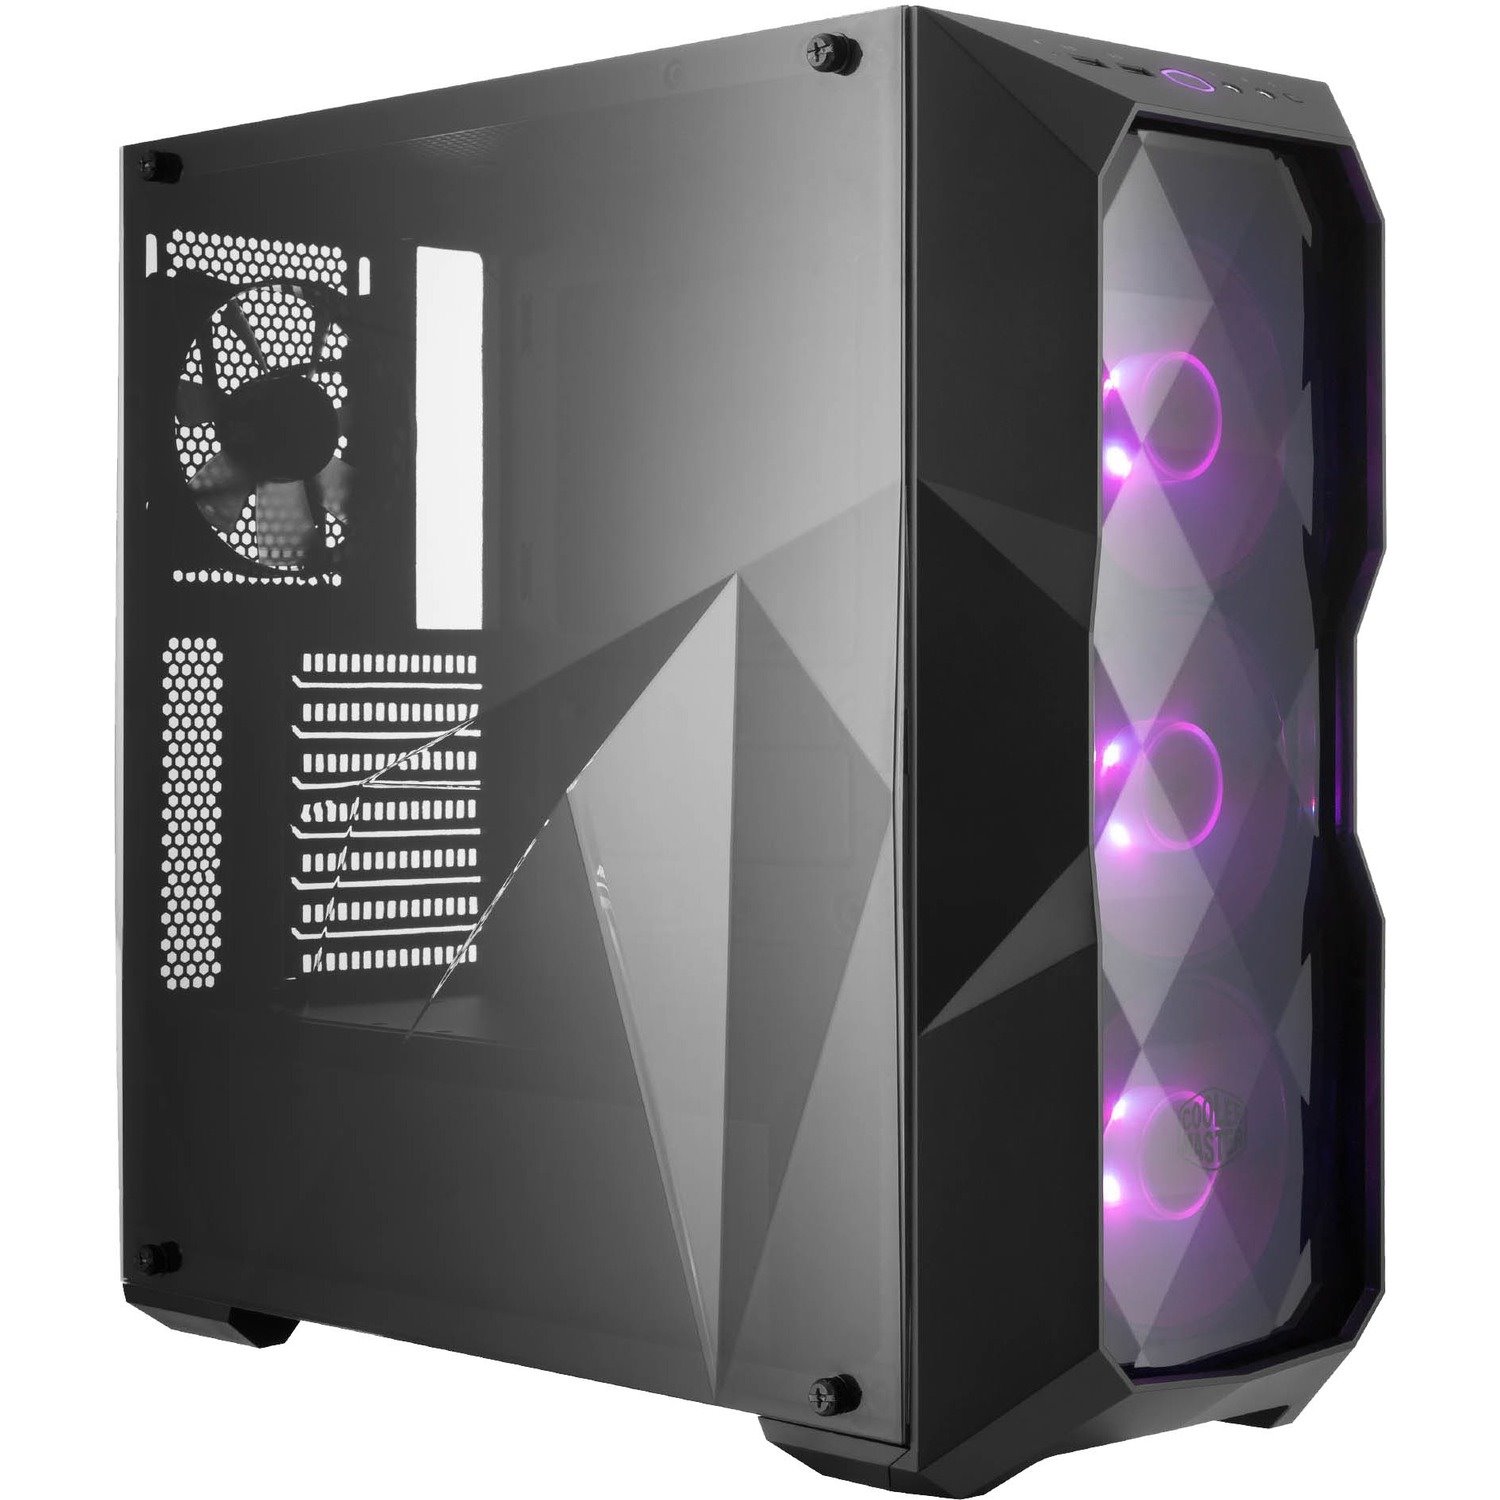 Cooler Master MasterBox TD500 Computer Case - ATX, Micro ATX, Mini ITX Motherboard Supported - Mid-tower - Steel, Plastic, Transparent - Black